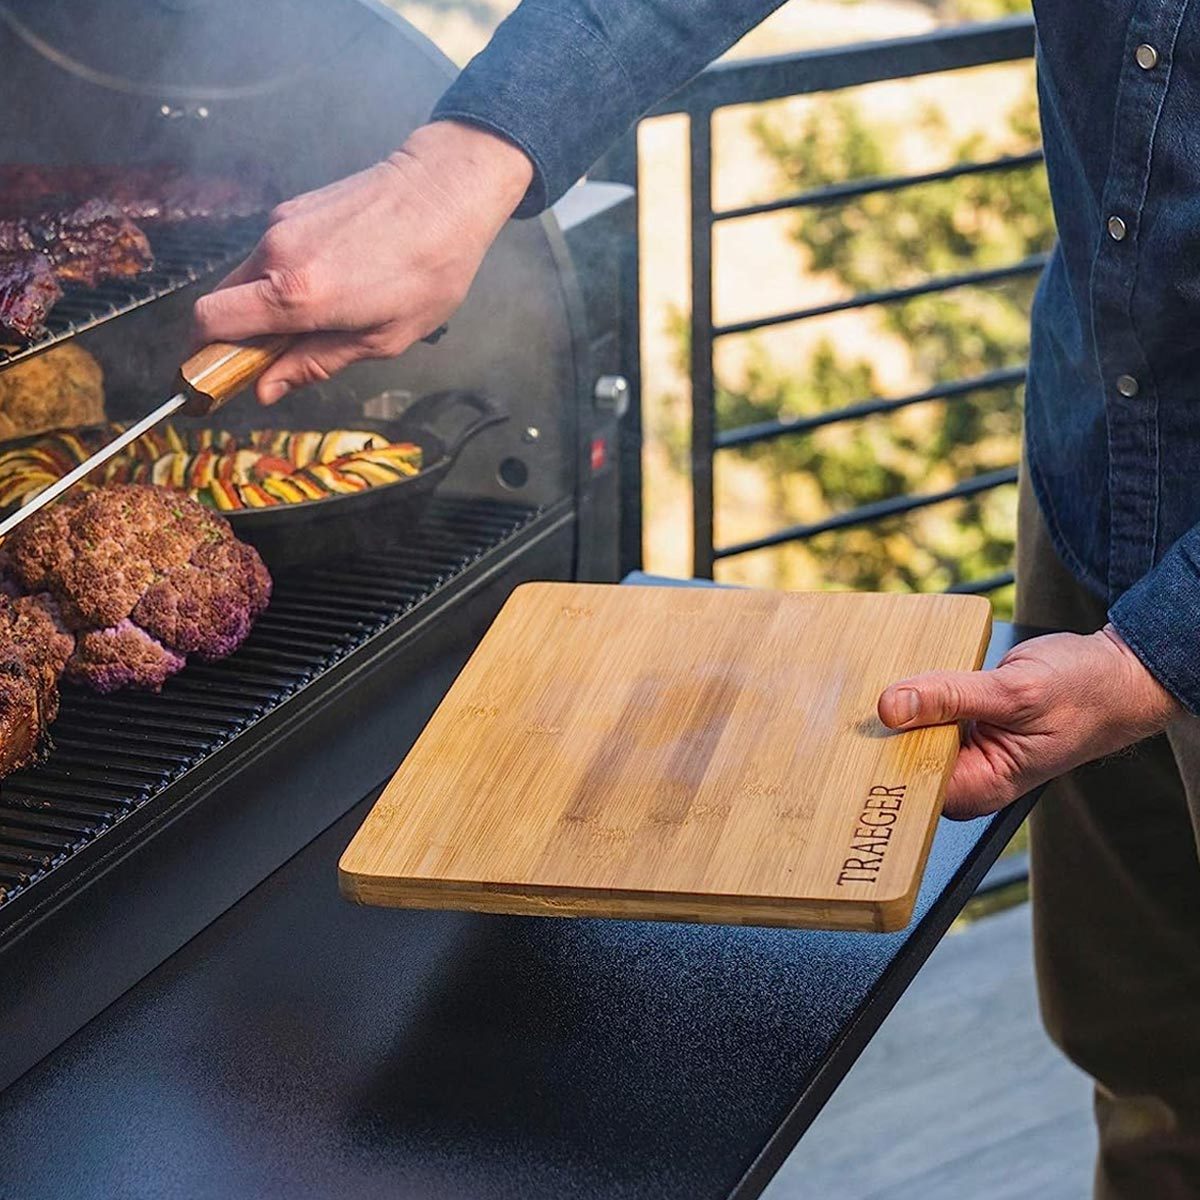 12 Must-Have Traeger Grill Accessories for the Ultimate Outdoor Cookout